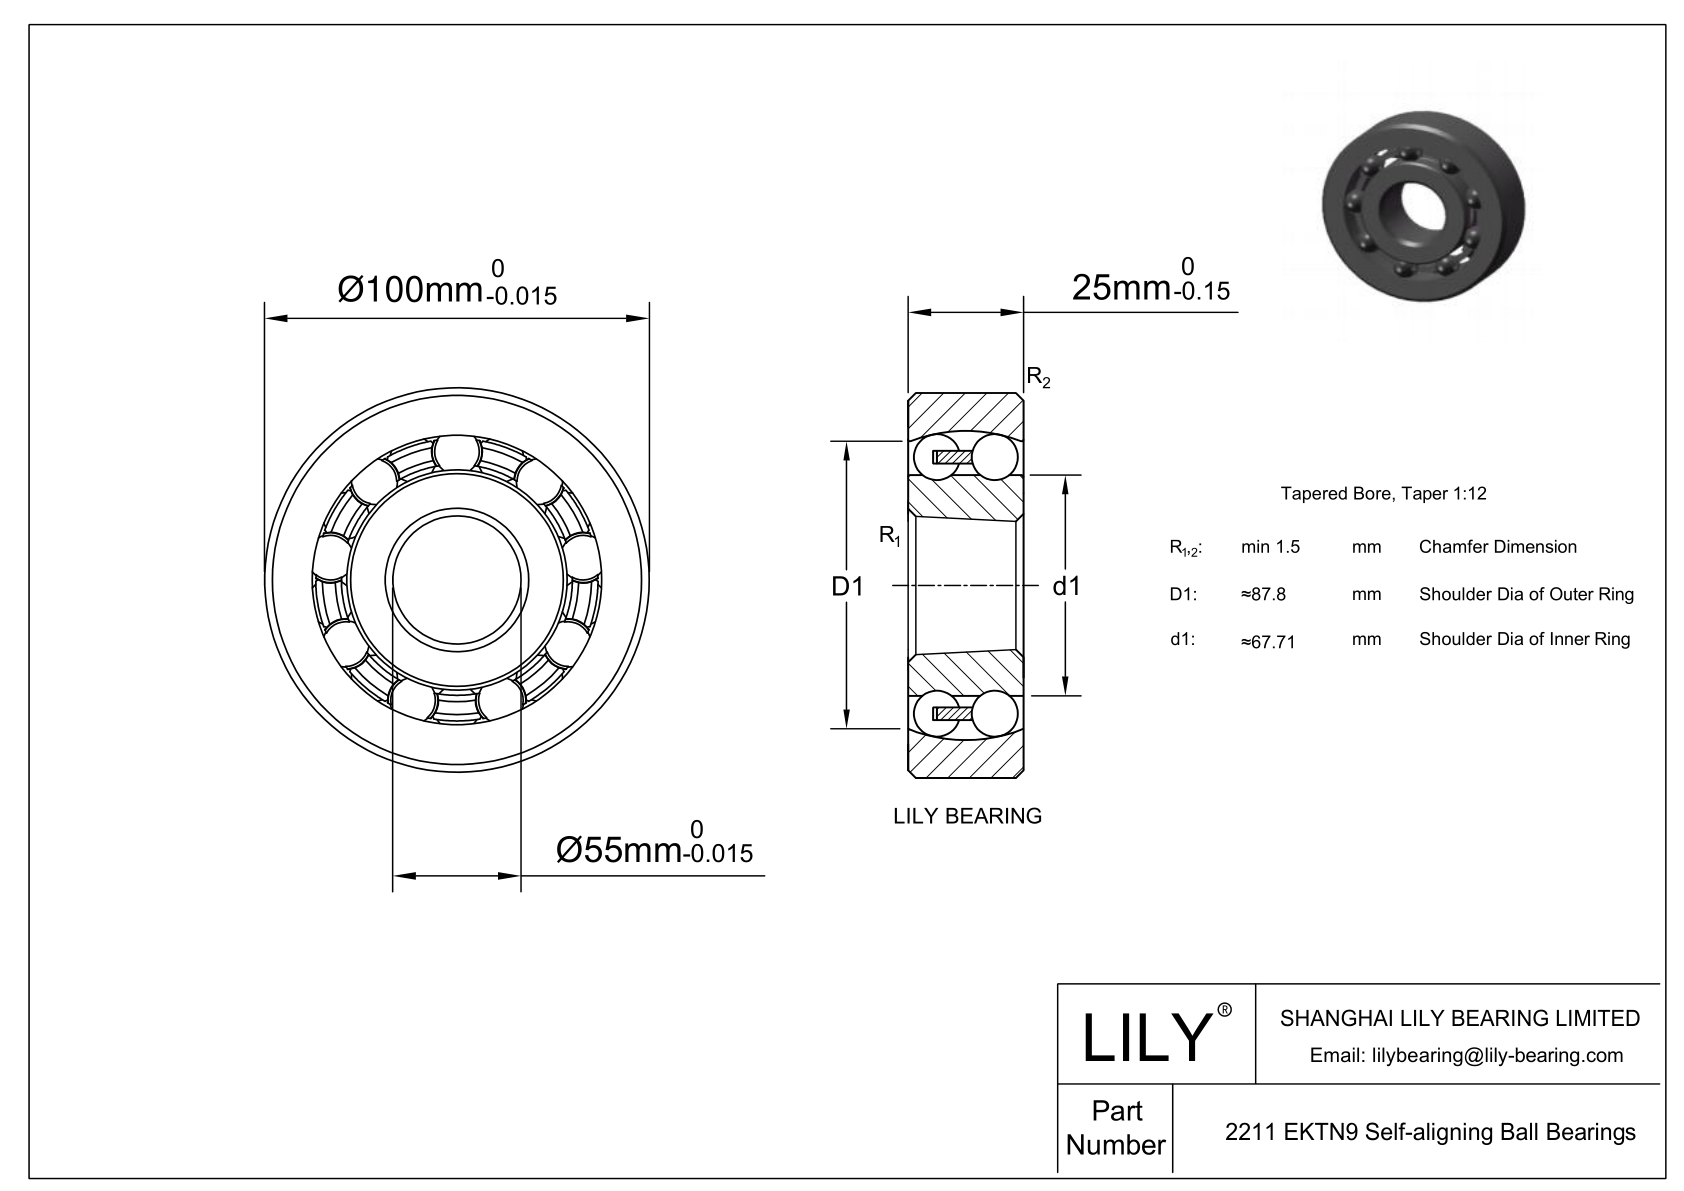 CE2211SI Silicon Nitride Self Aligning Ball Bearings cad drawing